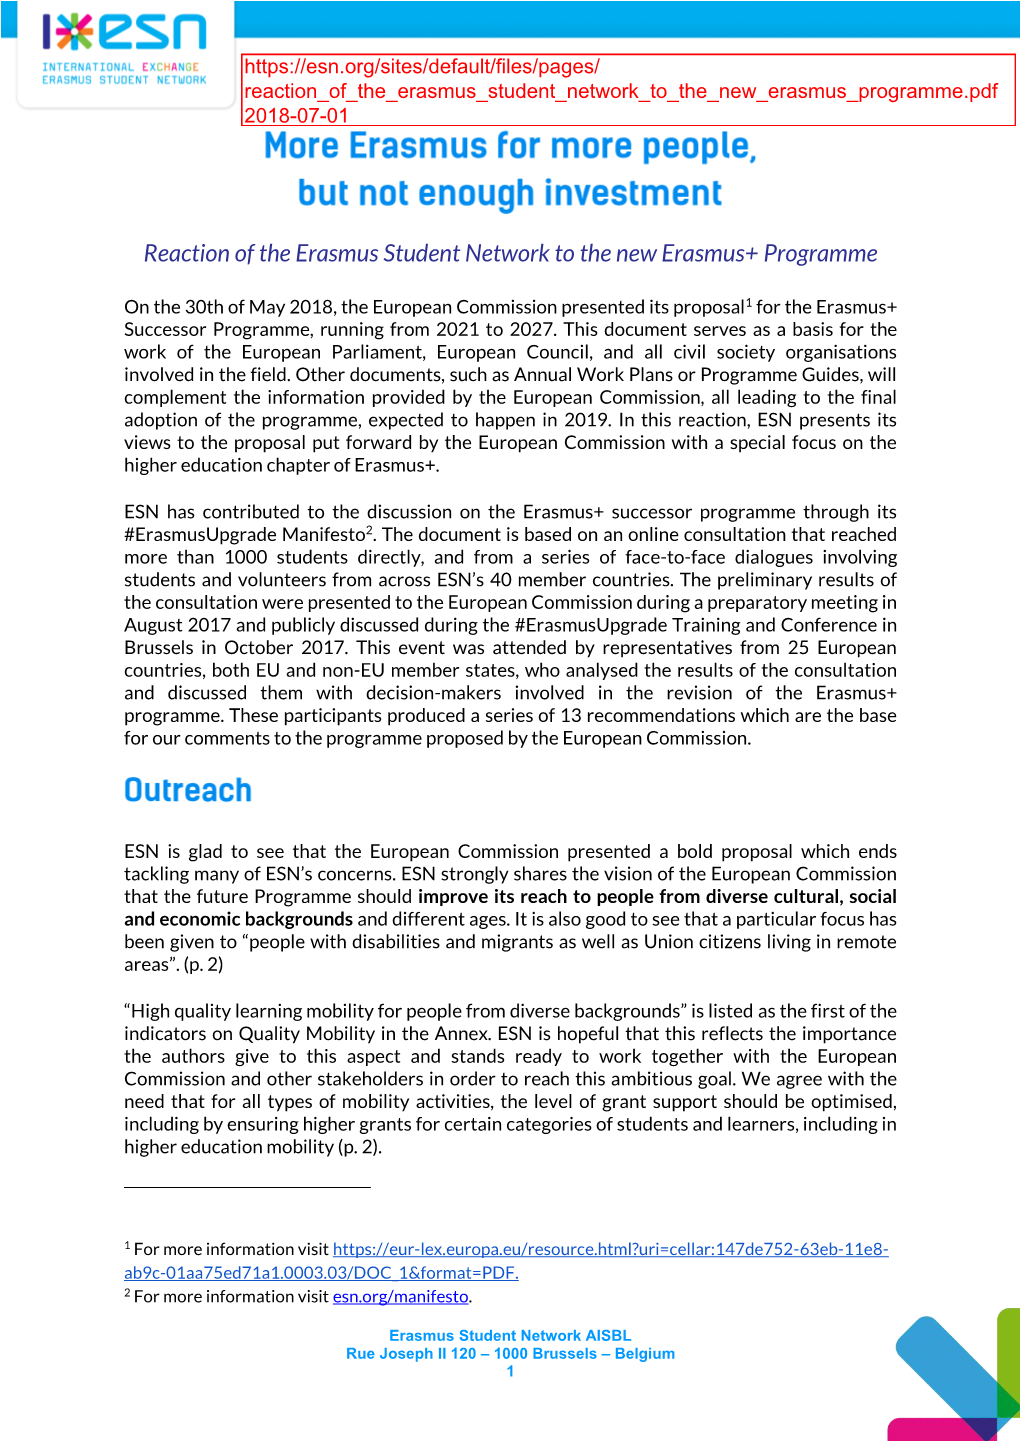 Reaction of the Erasmus Student Network to the New Erasmus+ Programme